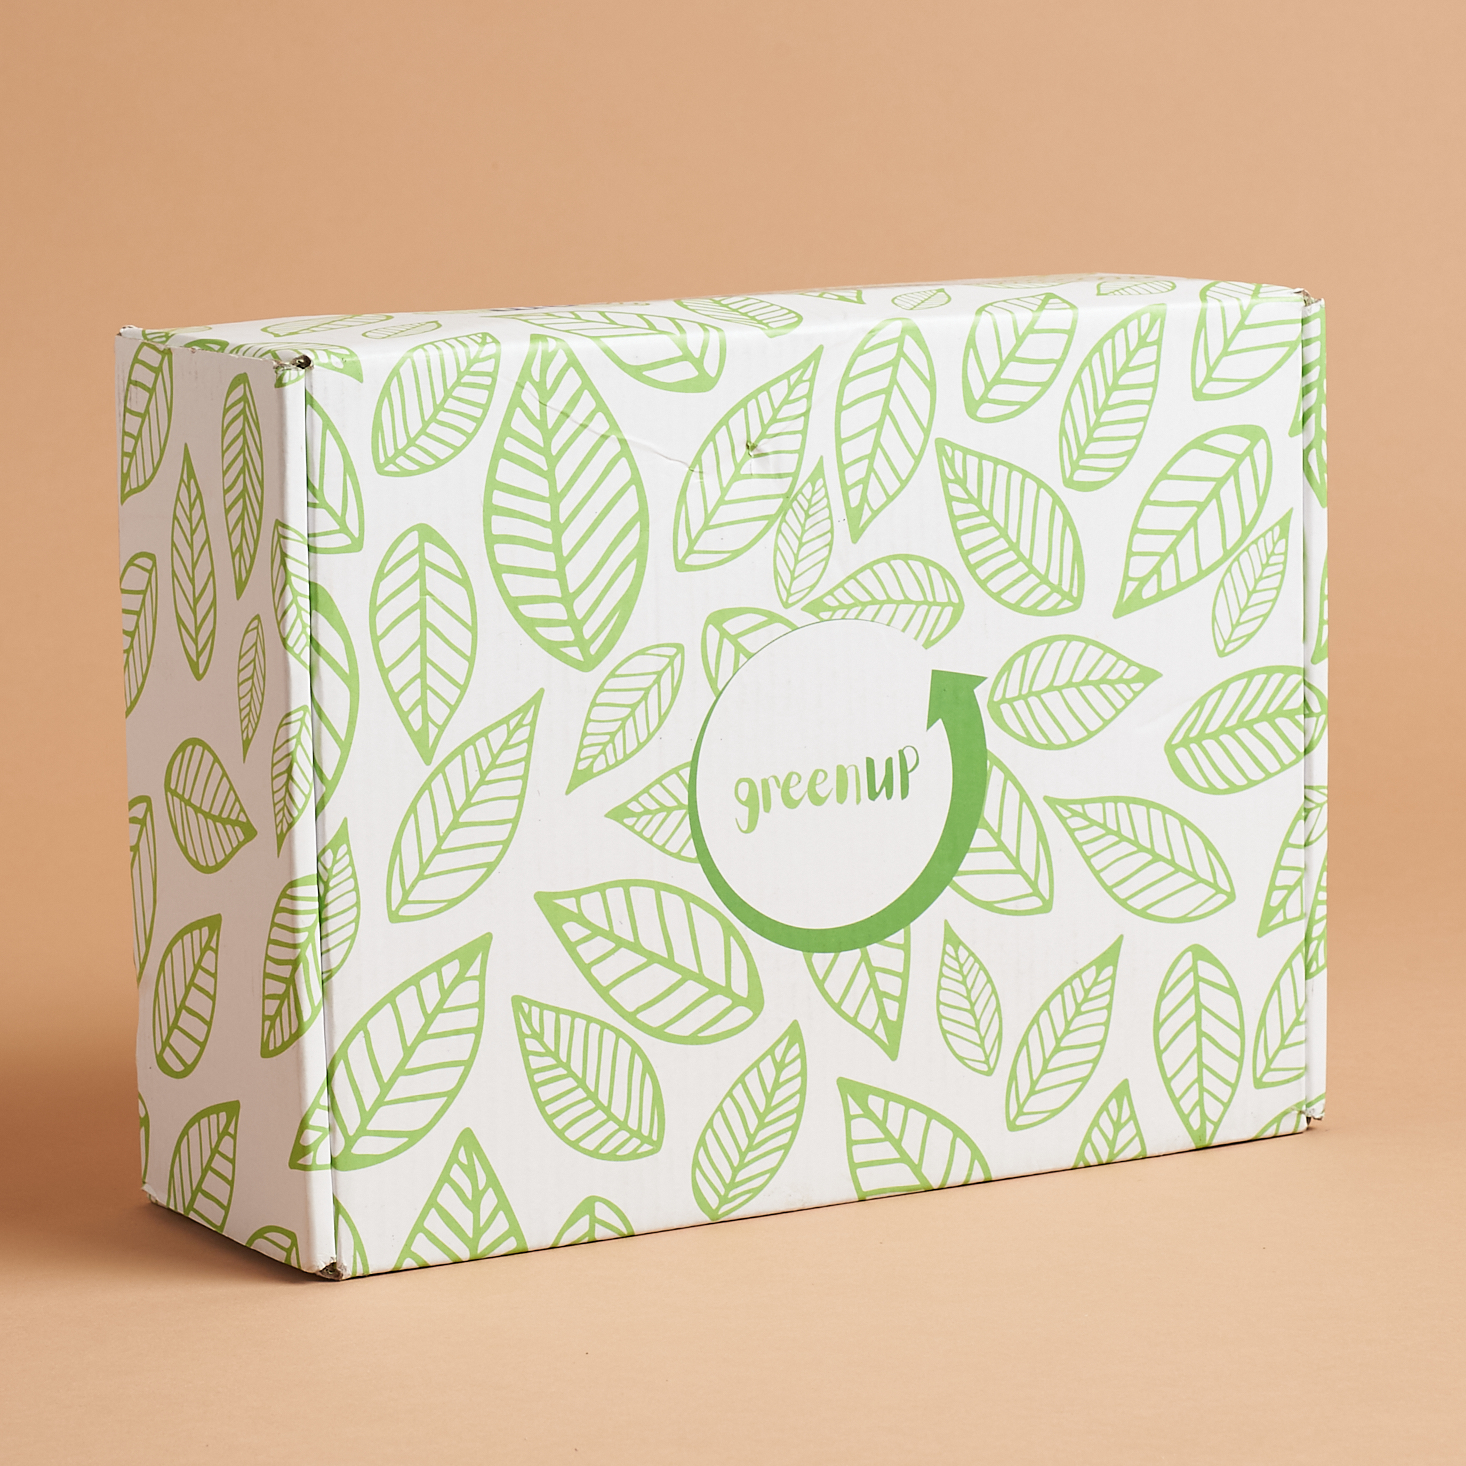 greenUP Box Subscription Review – Summer 2020